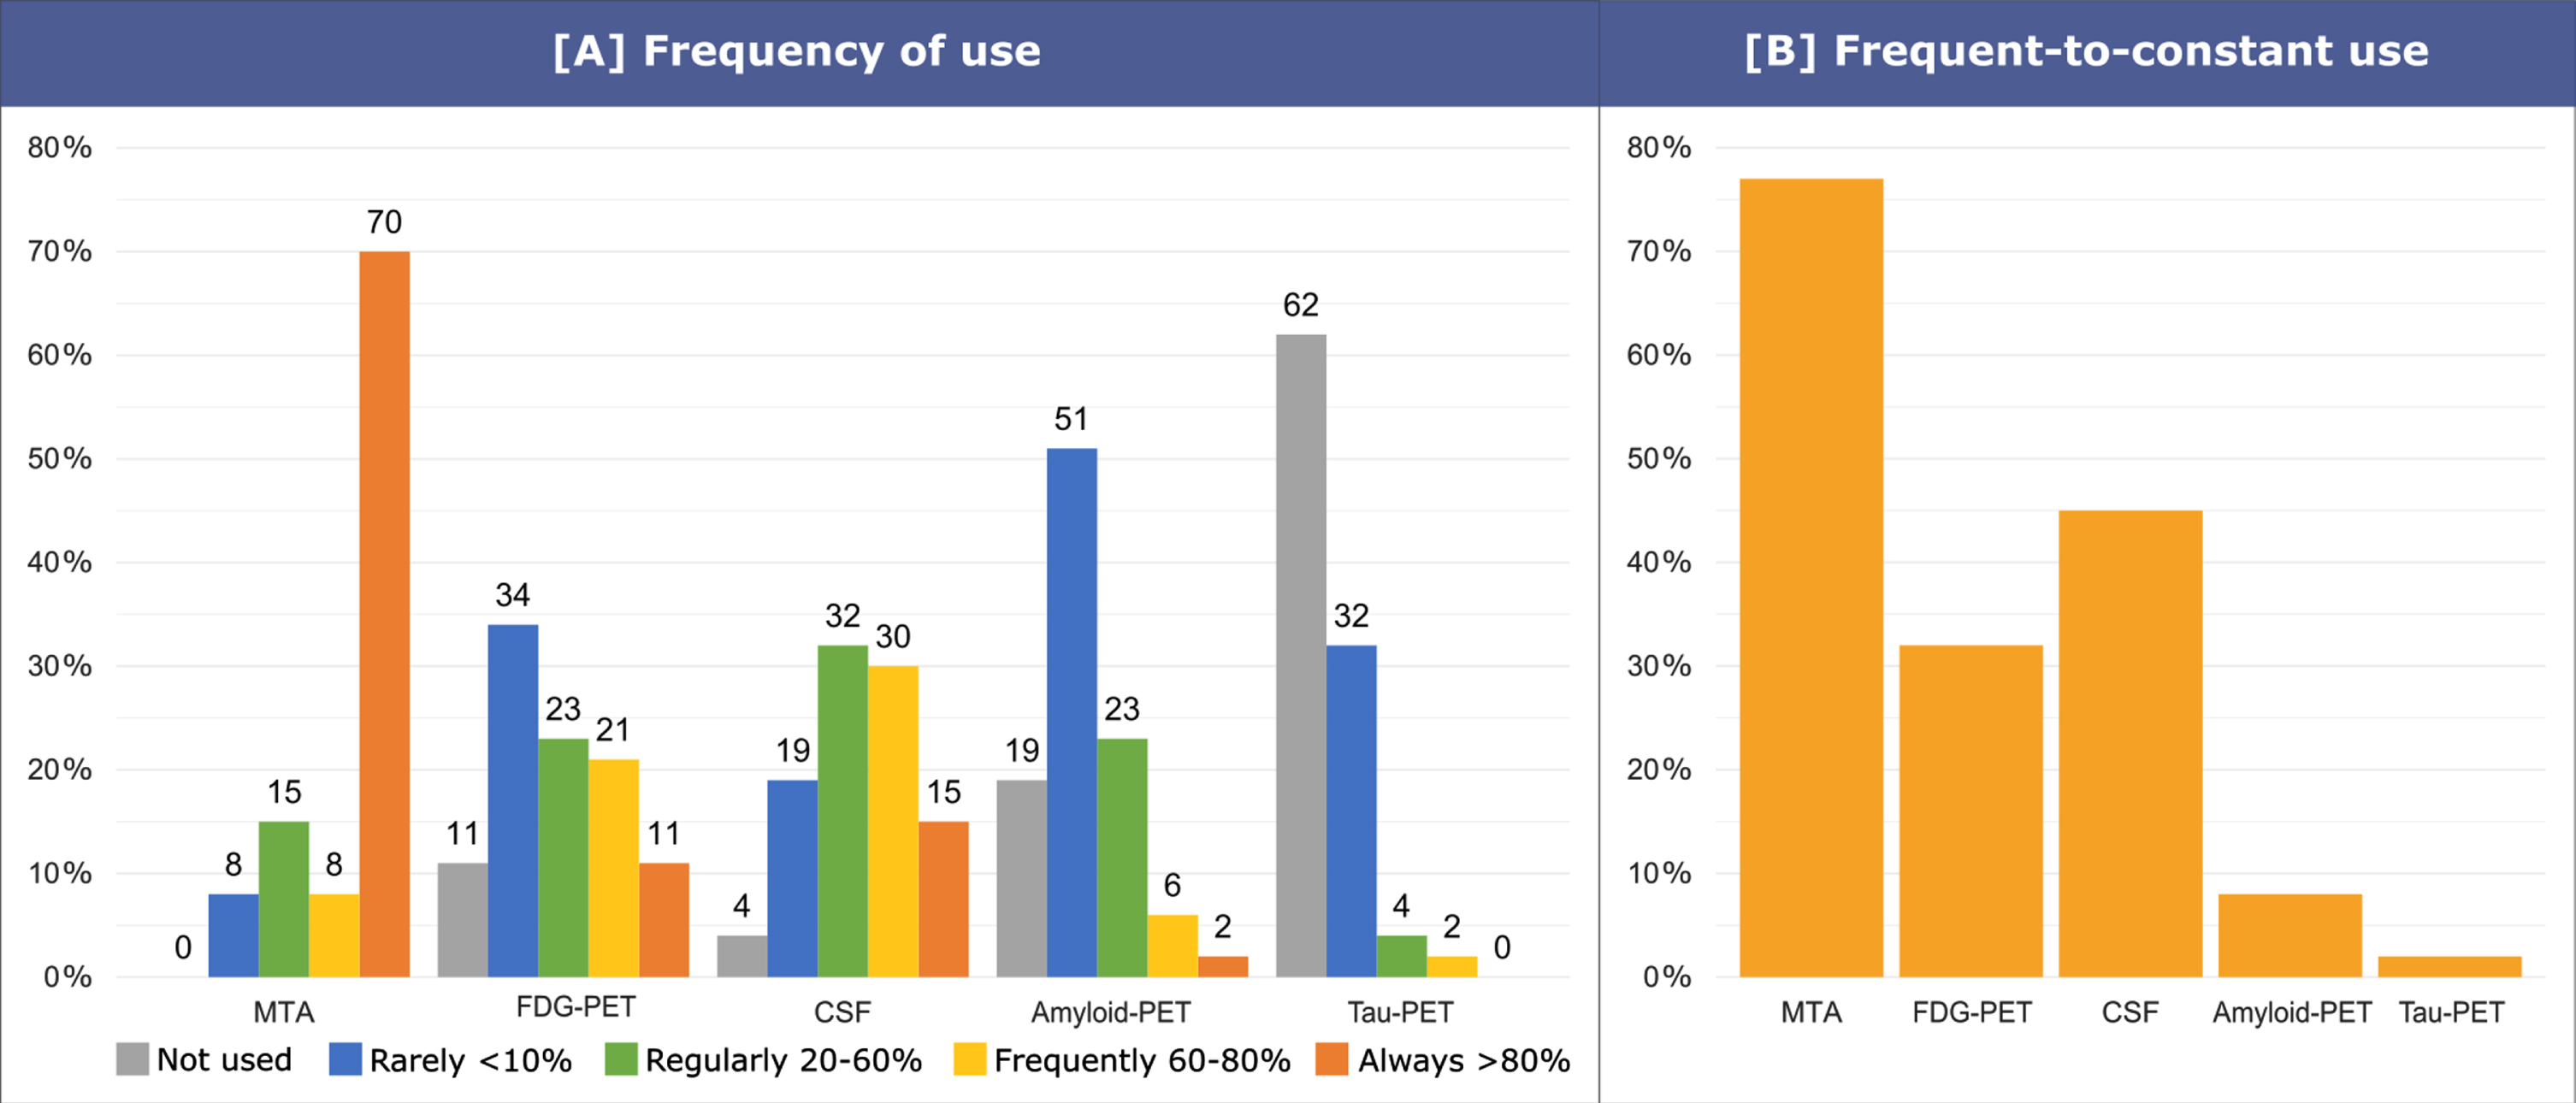 Frequency of use of AD biomarkers in MCI patients. The question asked to clinicians was: “In MCI, in your clinical practice, please state frequency of use for medial temporal lobe atrophy (MRI), FDG-PET, CSF (e.g., A
β42, p-tau, t-tau), amyloid-PET, tau-PET”. Possible answers were: not used (0%), rarely (<10%), regularly (20–60%), frequently (60-80%), always (>80%). Answers were grouped into three categories: no use, rare-to-regular use (rarely or regularly), frequent-to-constant use (frequently or always).